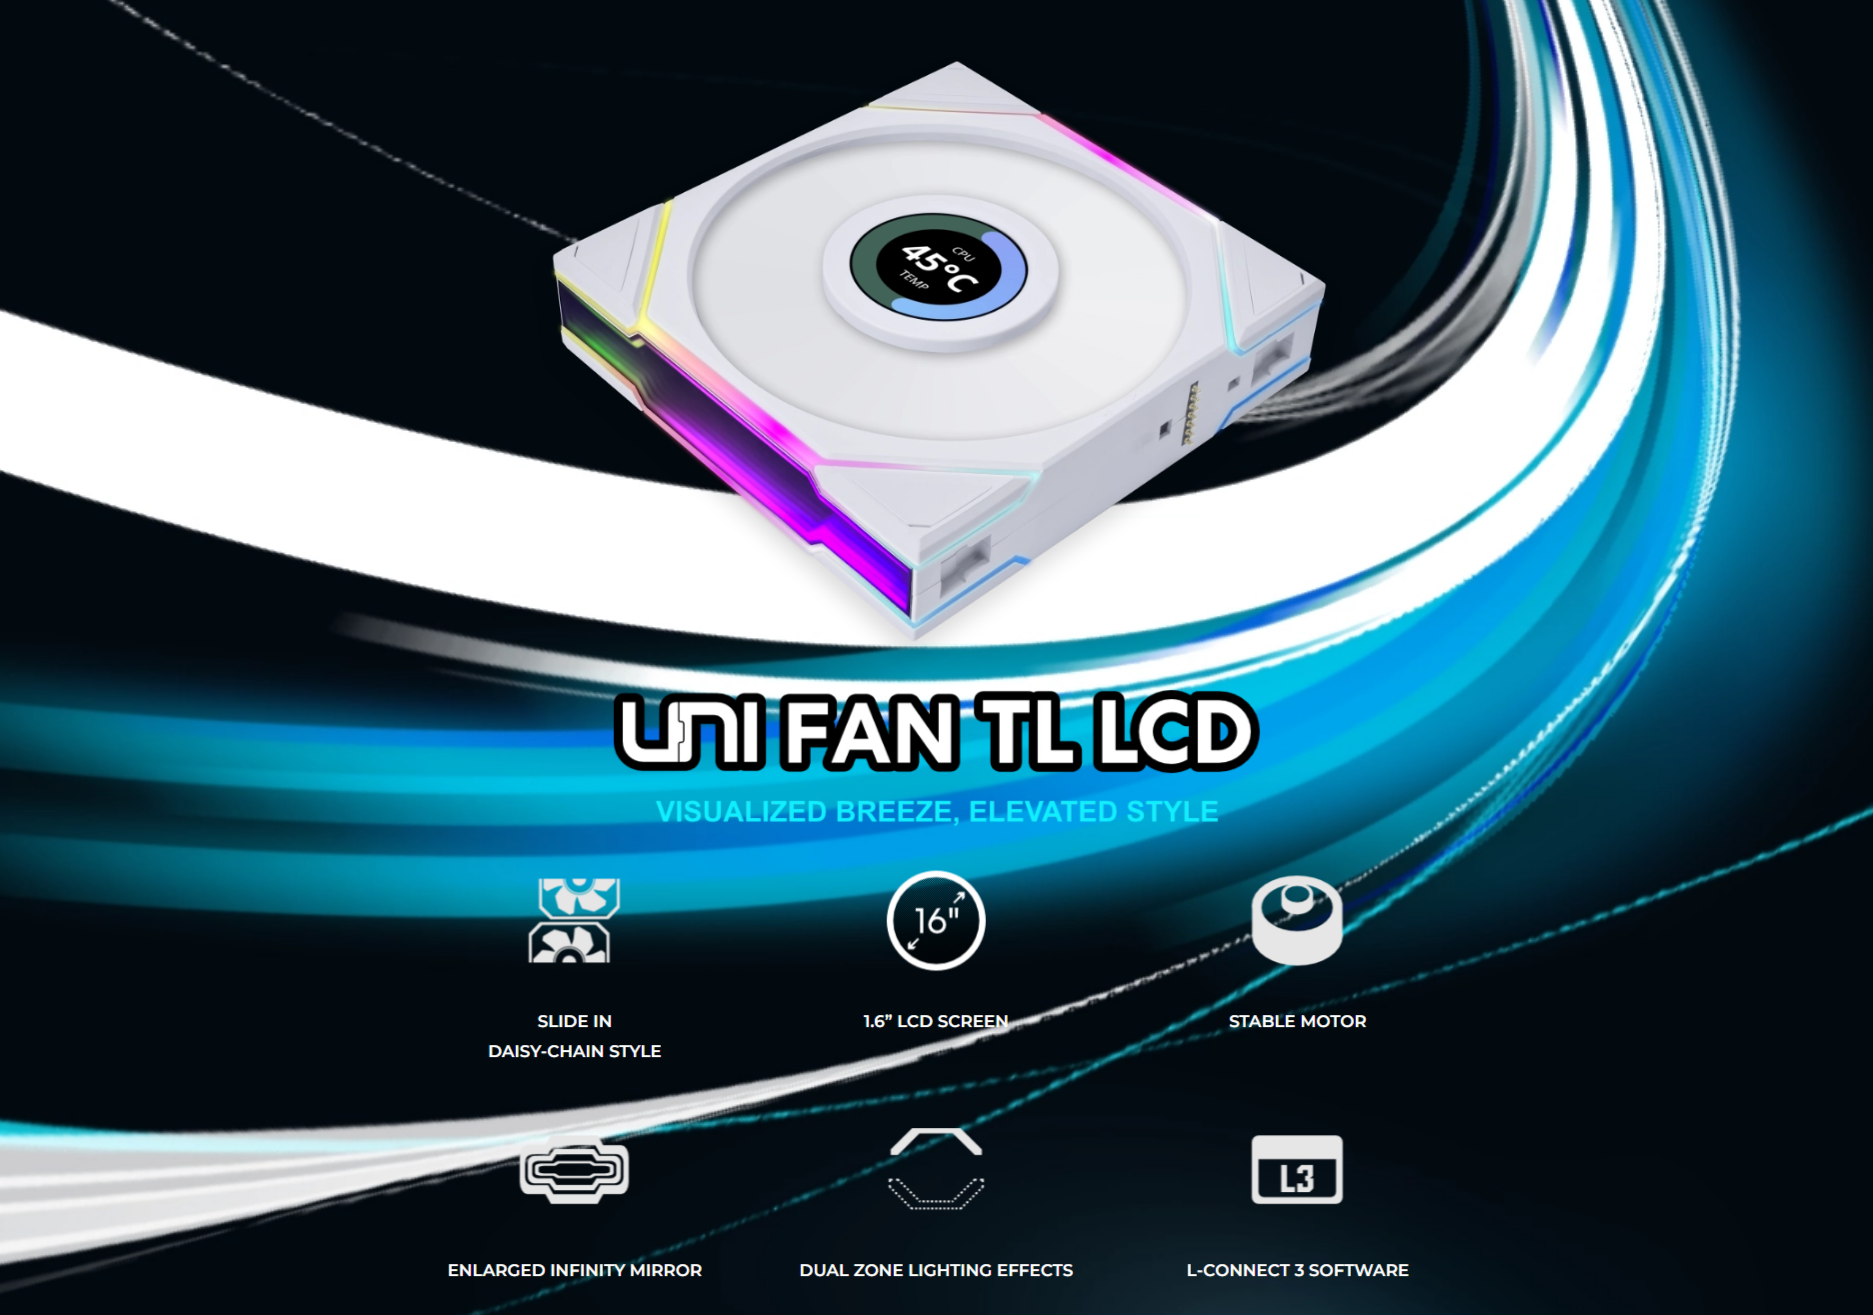 A large marketing image providing additional information about the product Lian Li UNI Fan TL LCD 120 Reverse Blade 120mm Fan Triple Pack - White - Additional alt info not provided